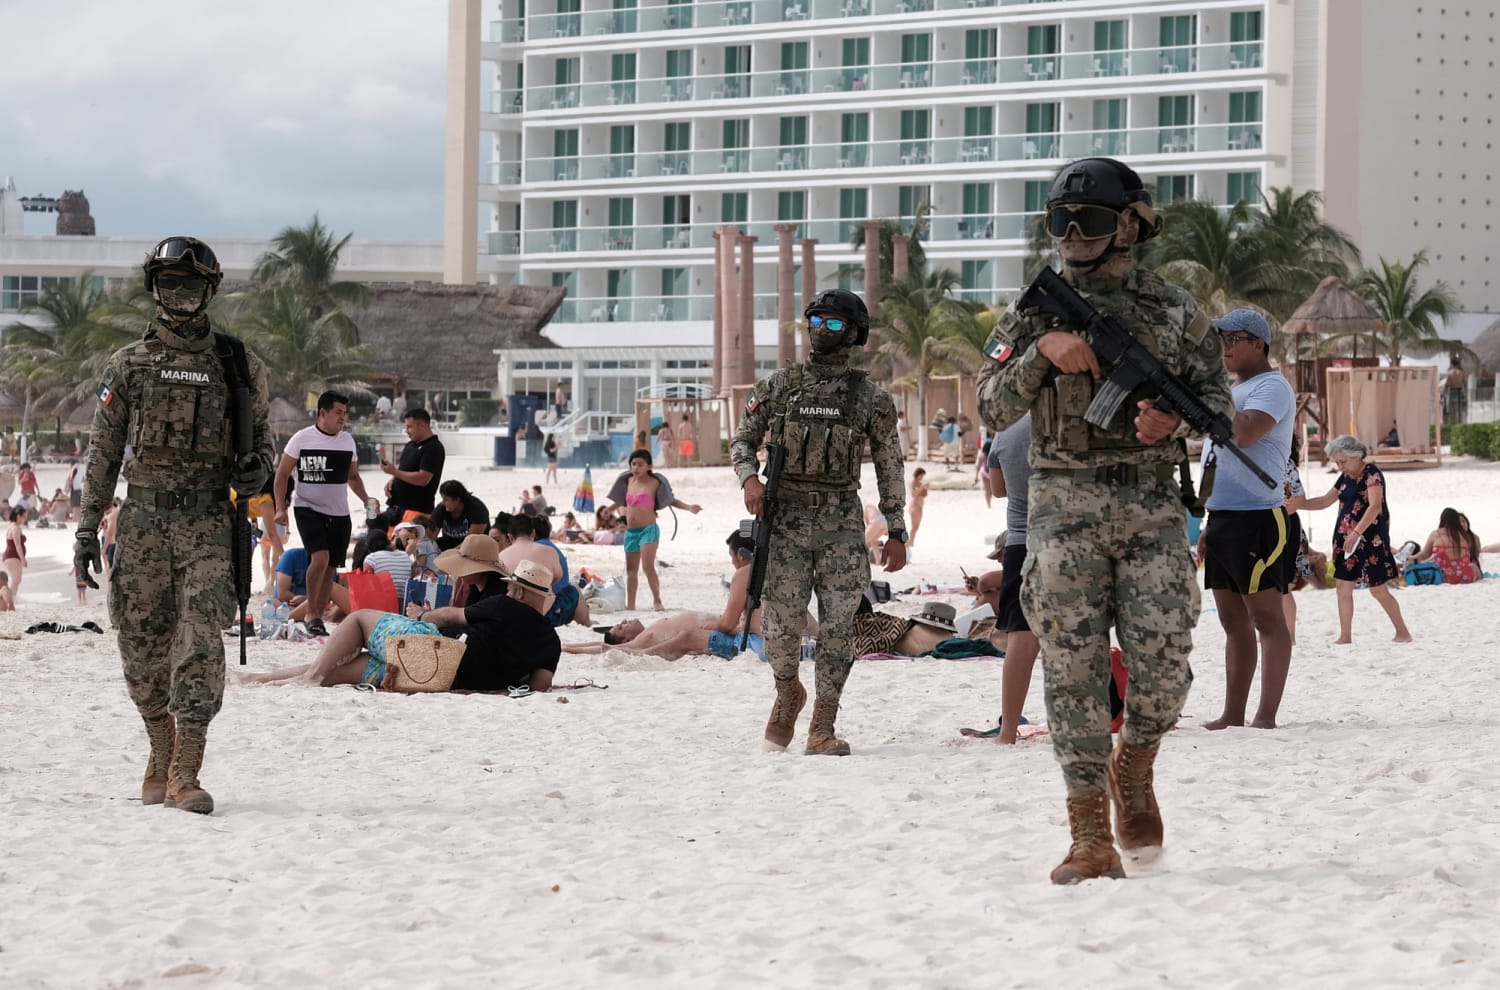 Gunfire reported at Cancun beach after shooters arrive on jet skis, police say